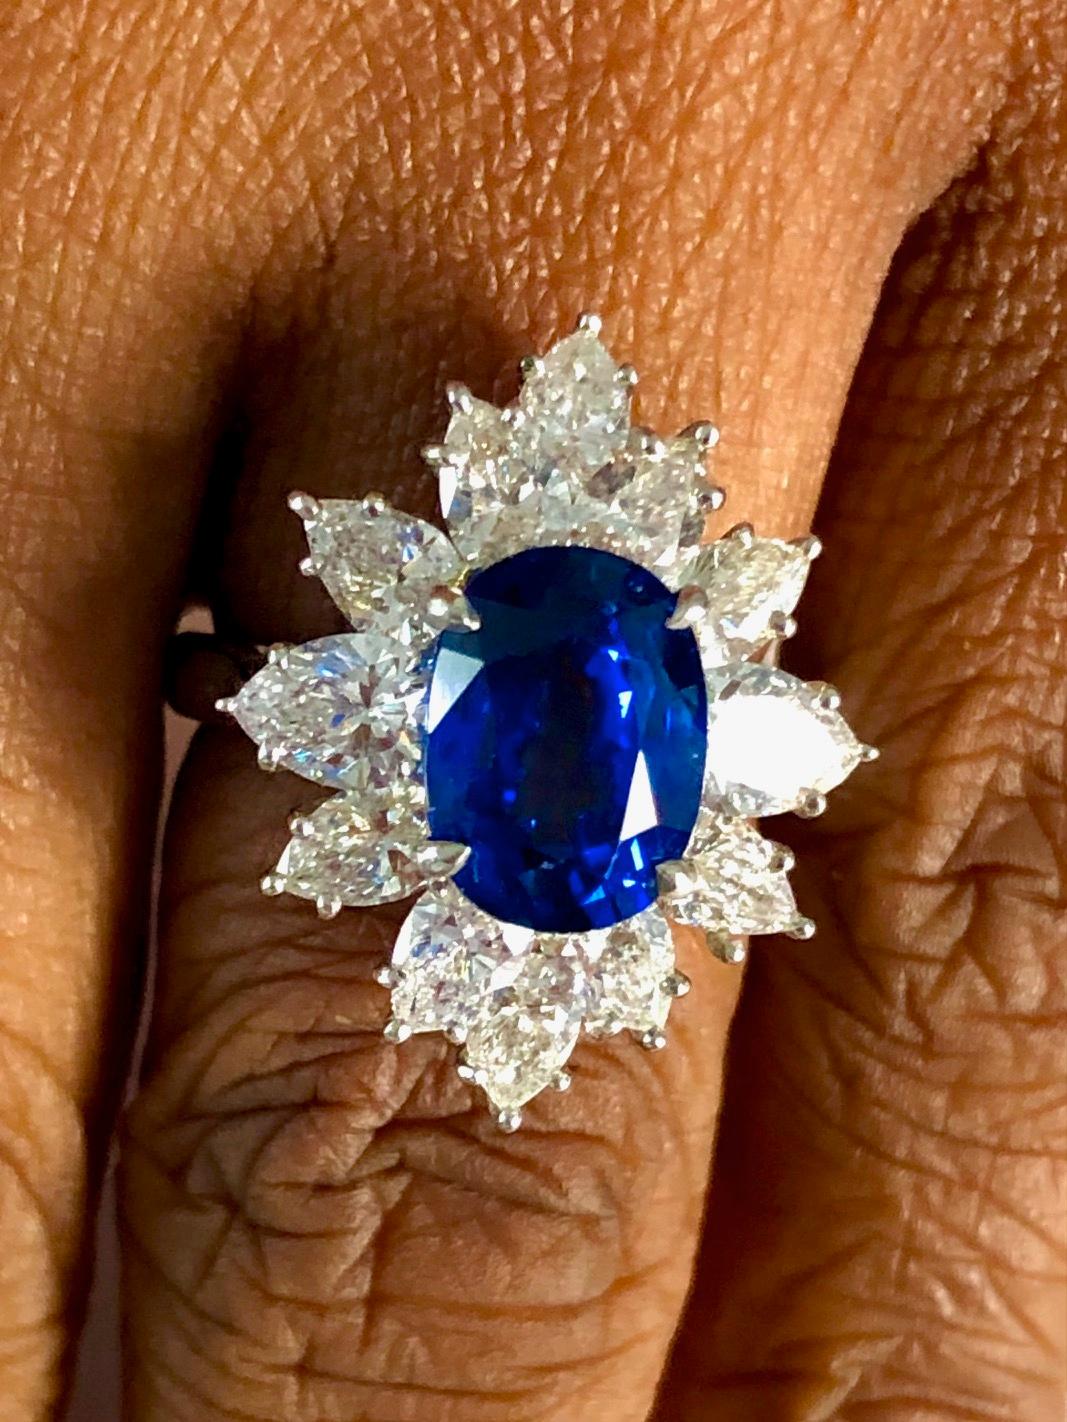 Classic design, handmade Platinum Ring set with 12 Pear Shape high quality Diamonds 2.99 carats, and a Royal Blue Ceylon Sapphire 4.30 carats.

We design and manufacture our jewelry in our workshop, located in New York City's diamond district.